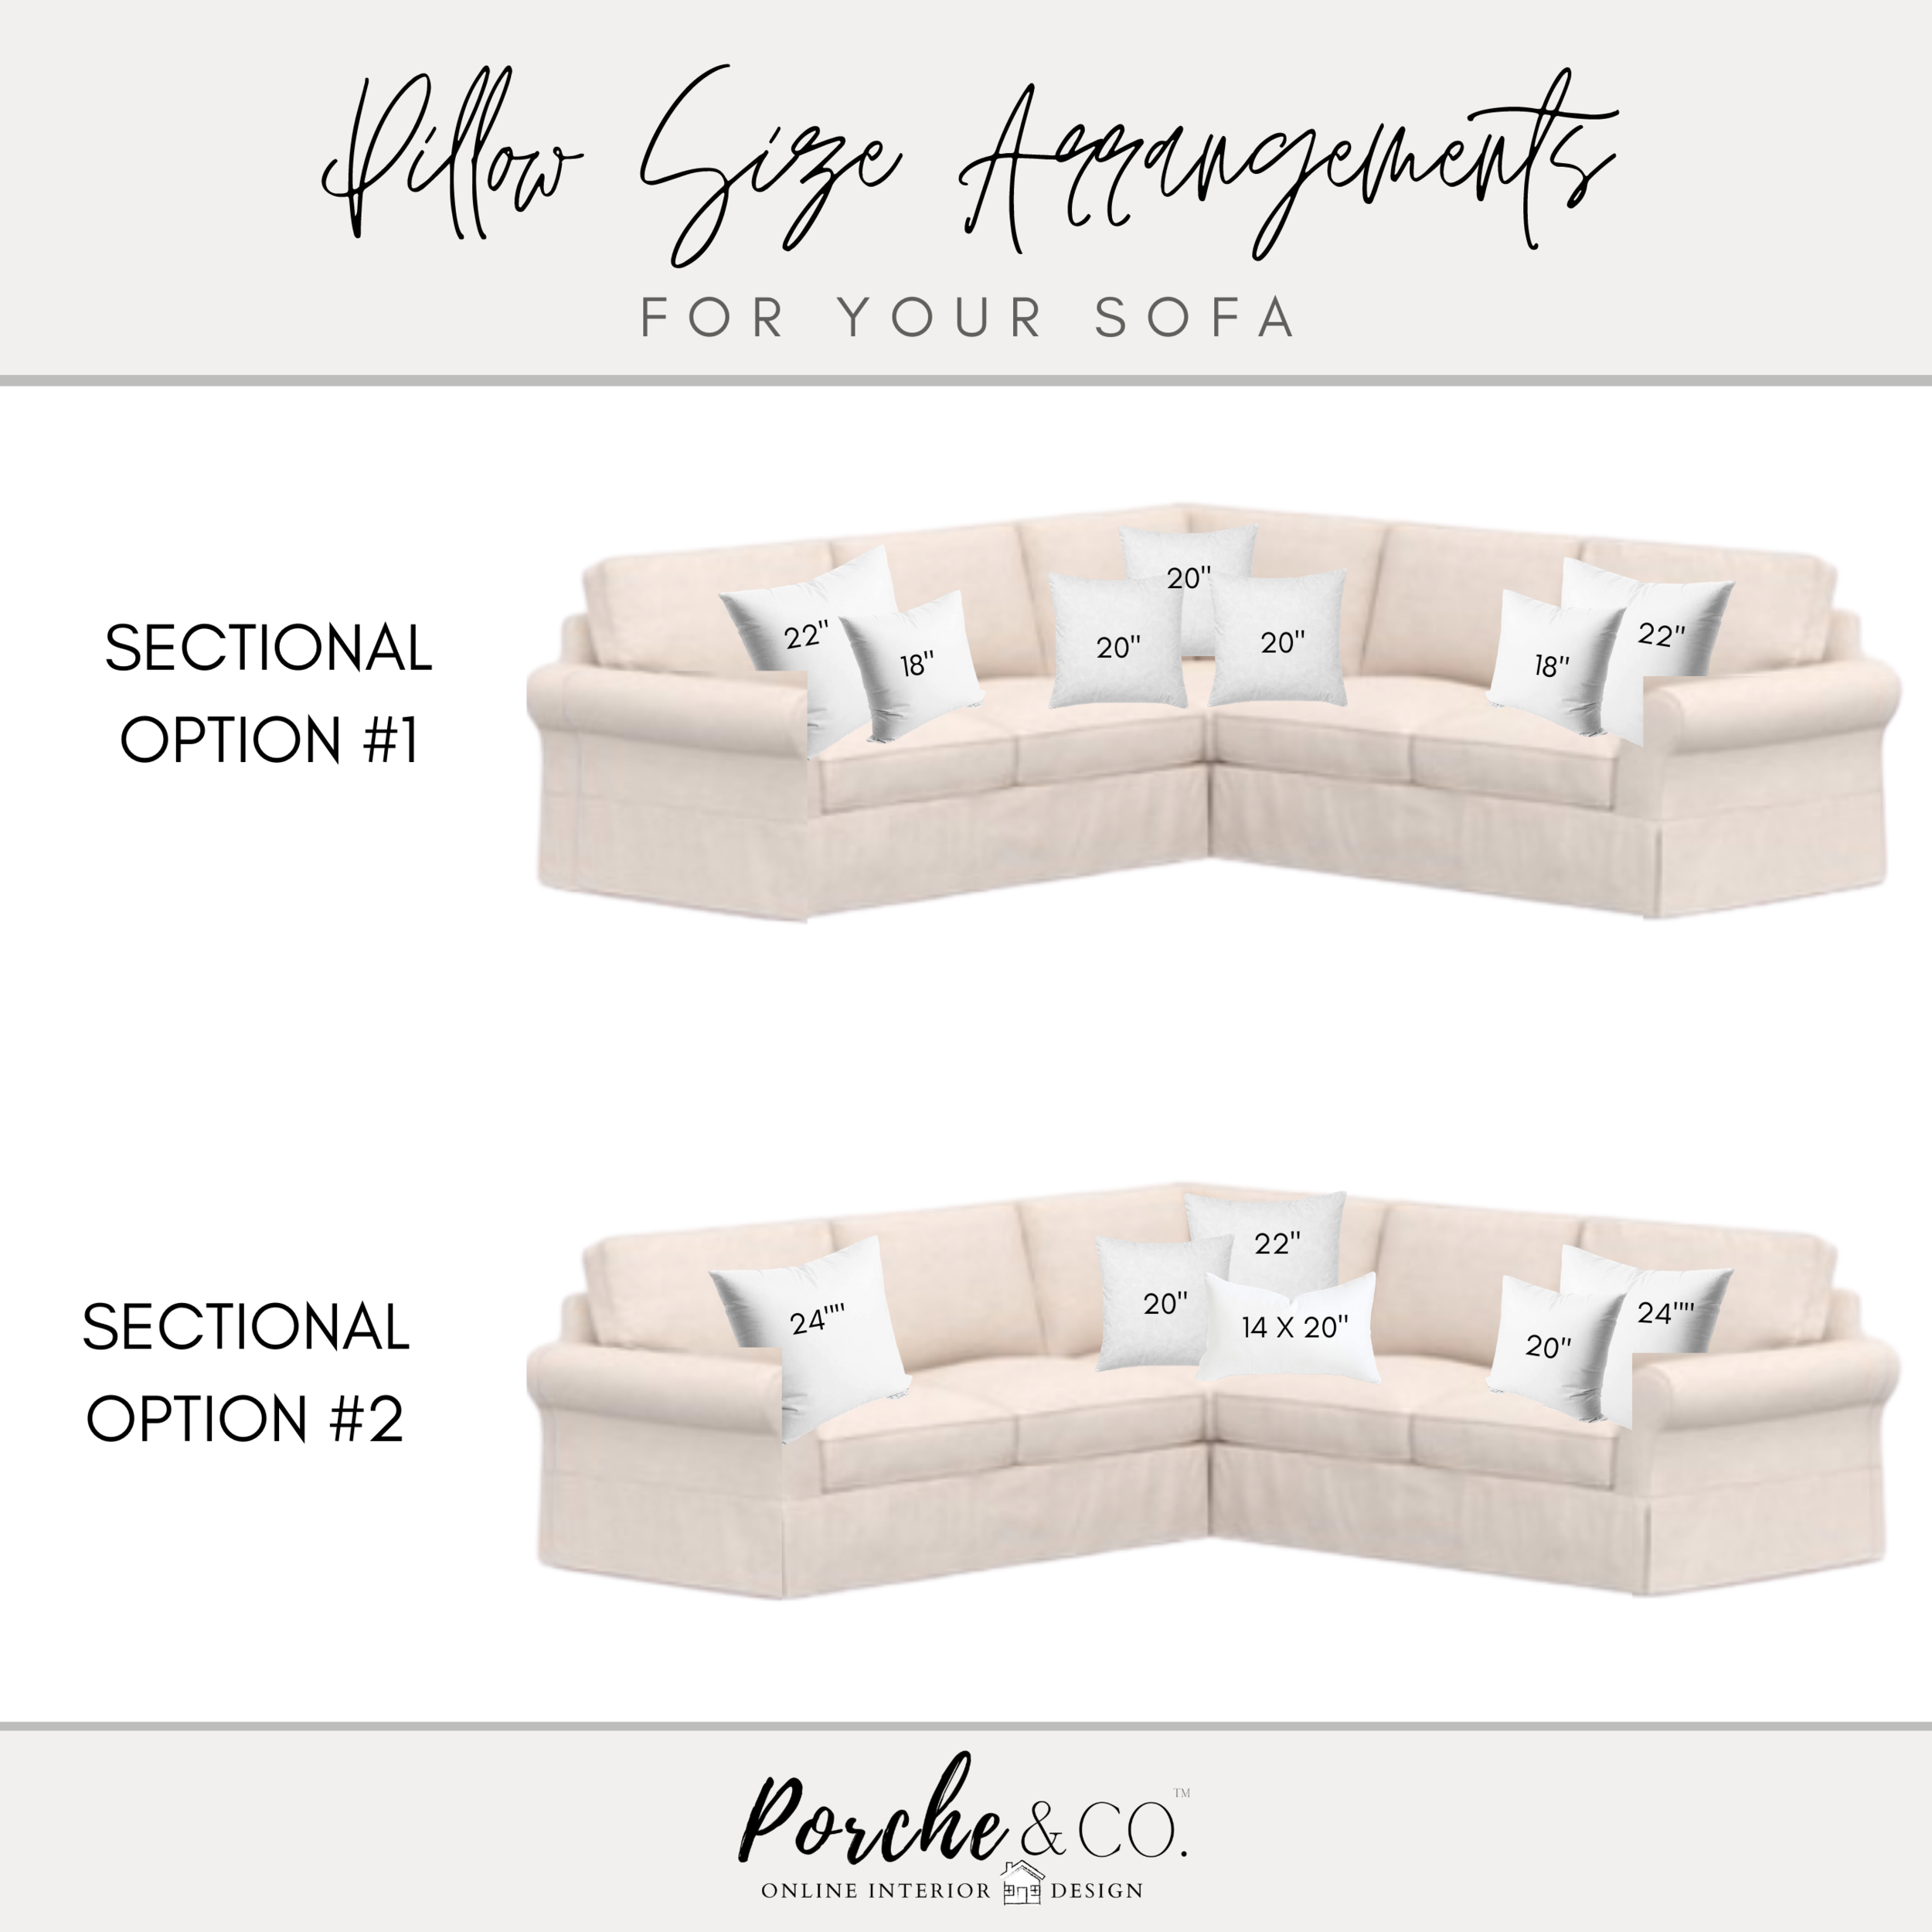 How To arrange Pillows On A Sectional - StoneGable